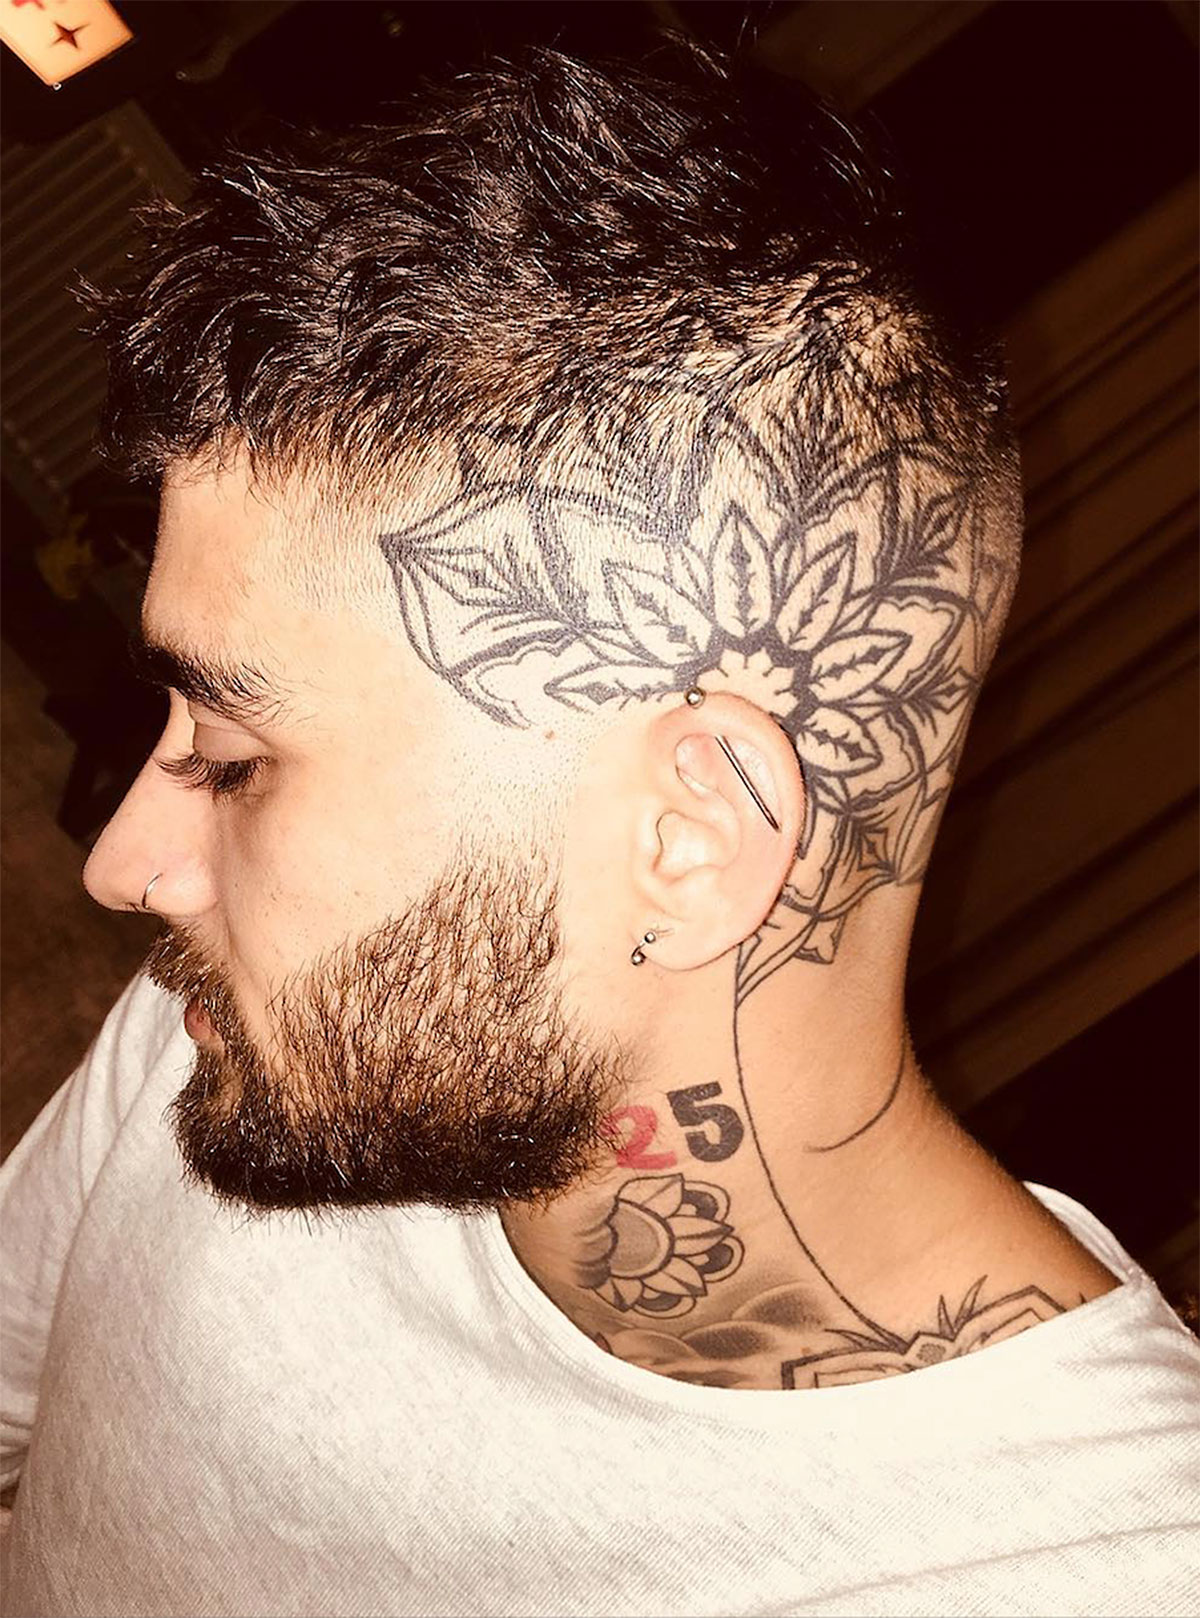 See Celebrities Who Have Face Tattoos, Permanent Ink: Pics